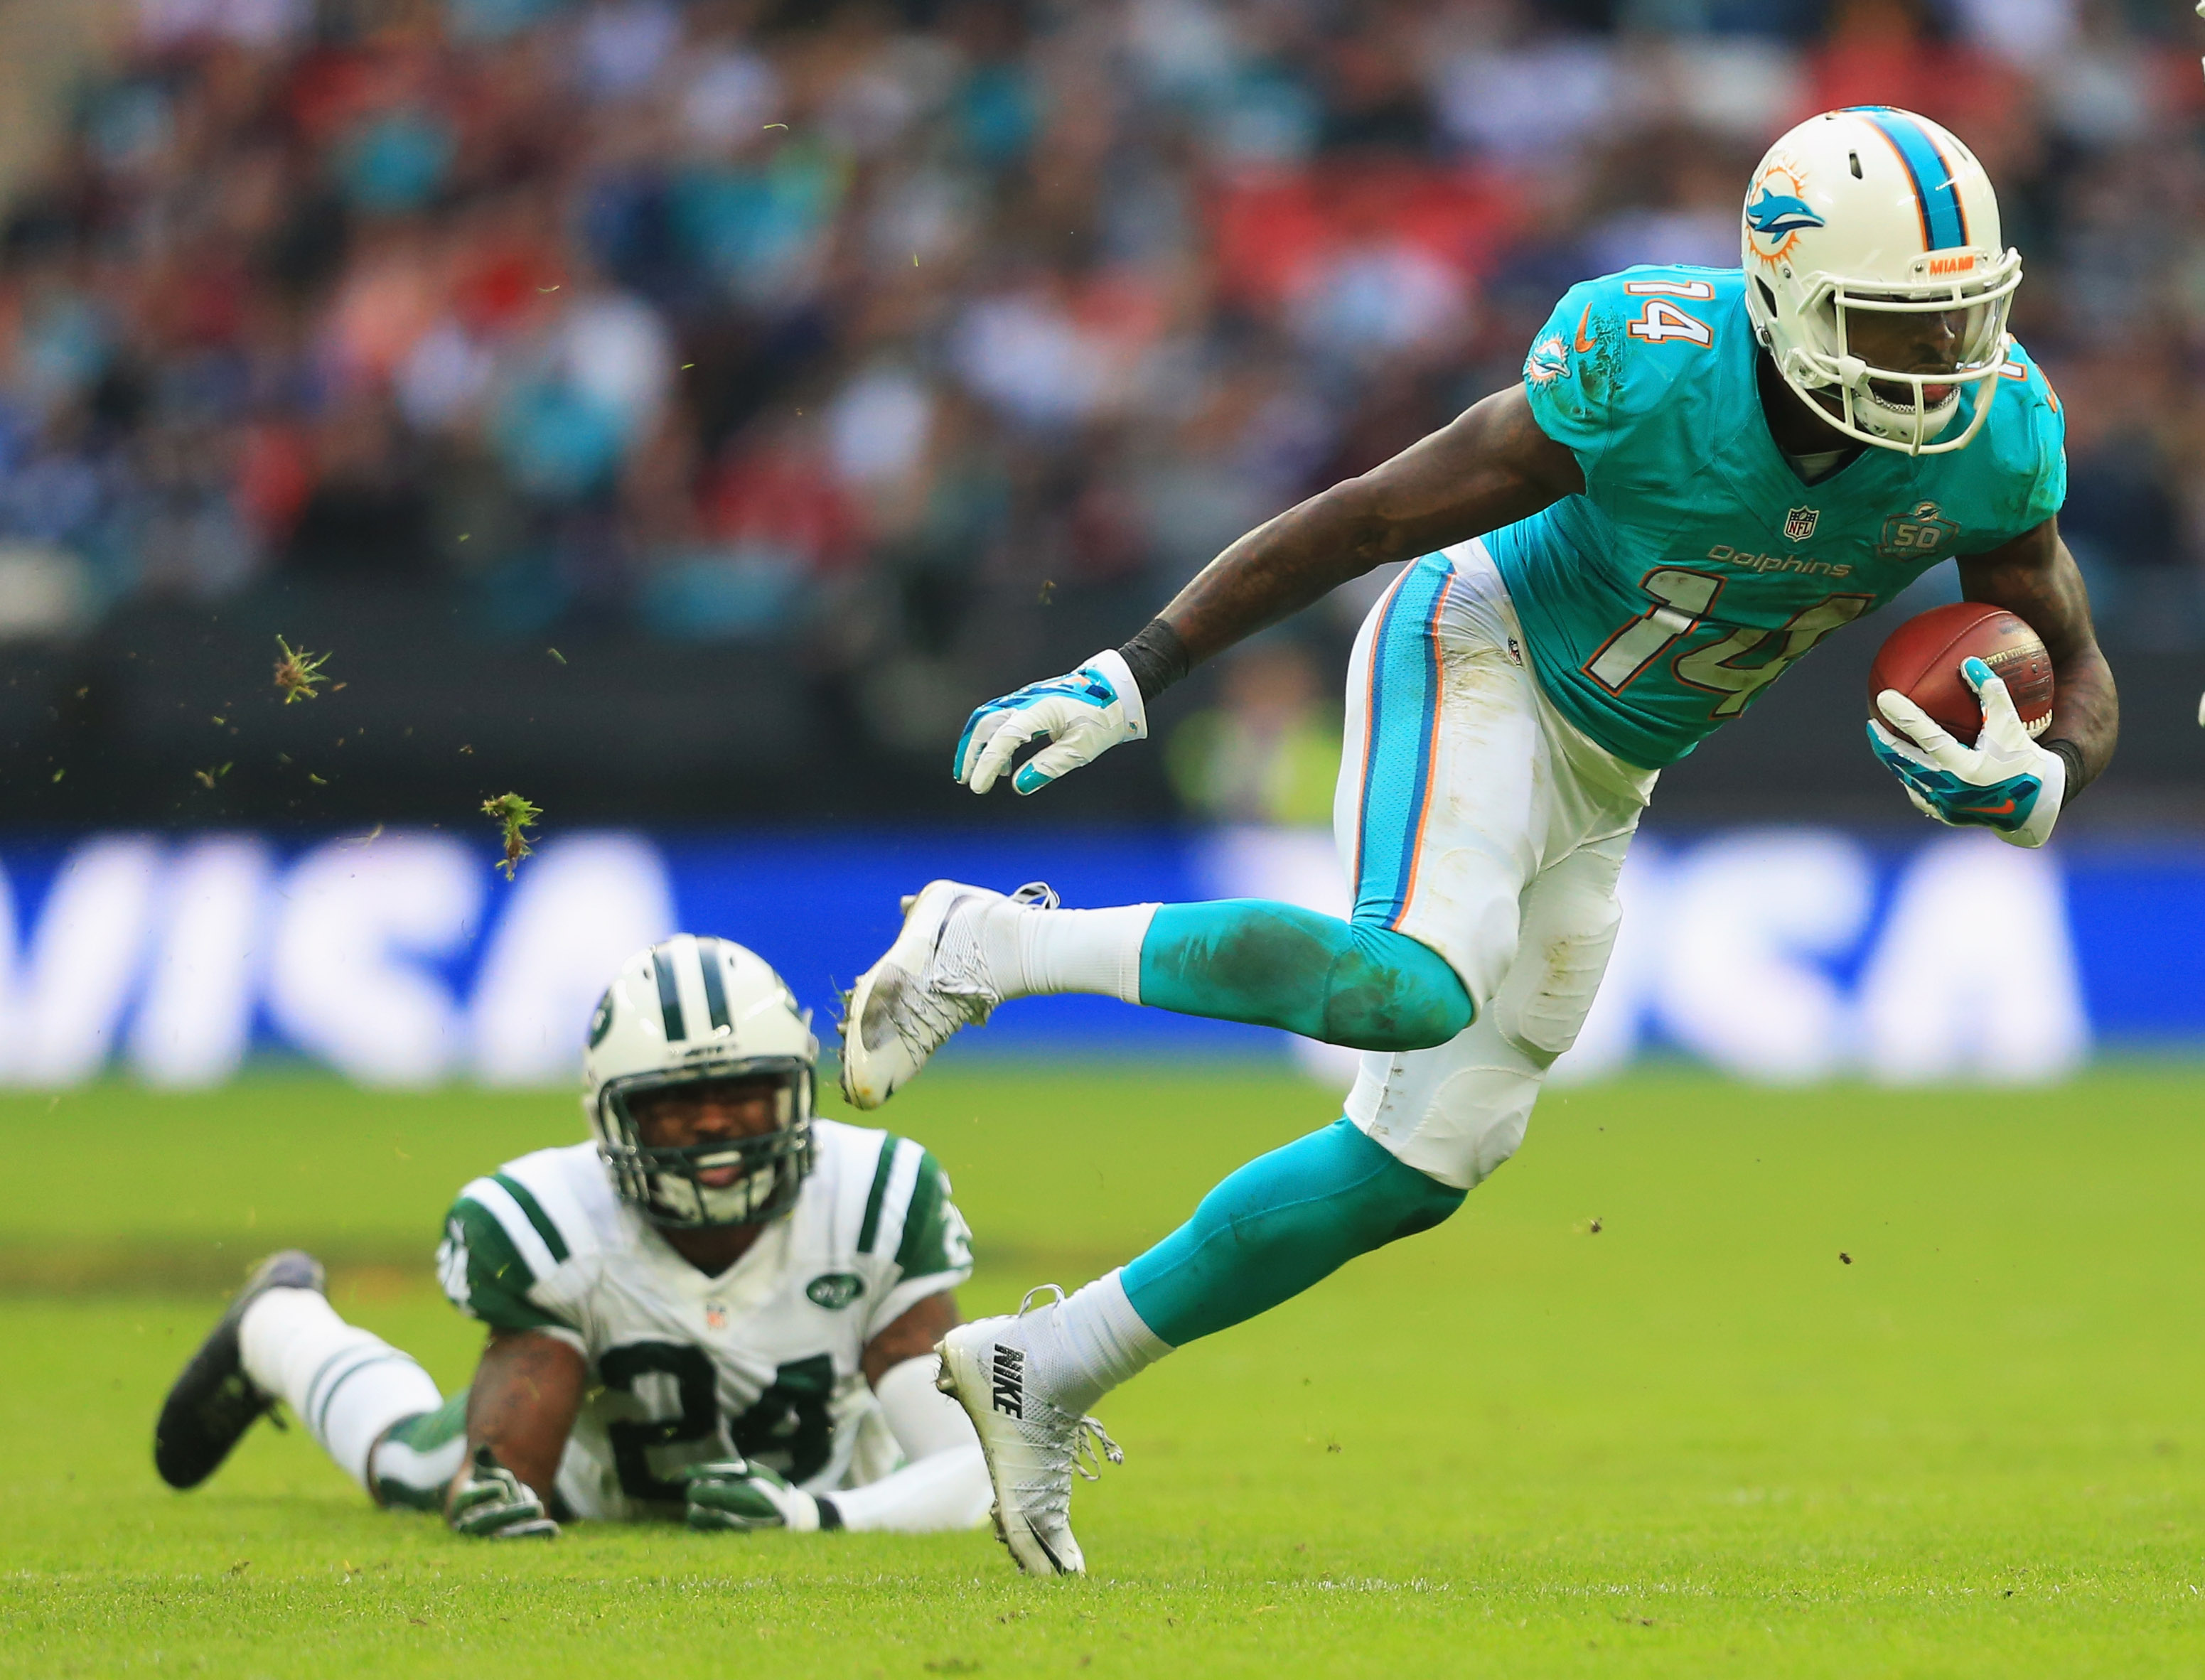 Jarvis Landry has been the lone spark for the Dolphins this season. (Getty)